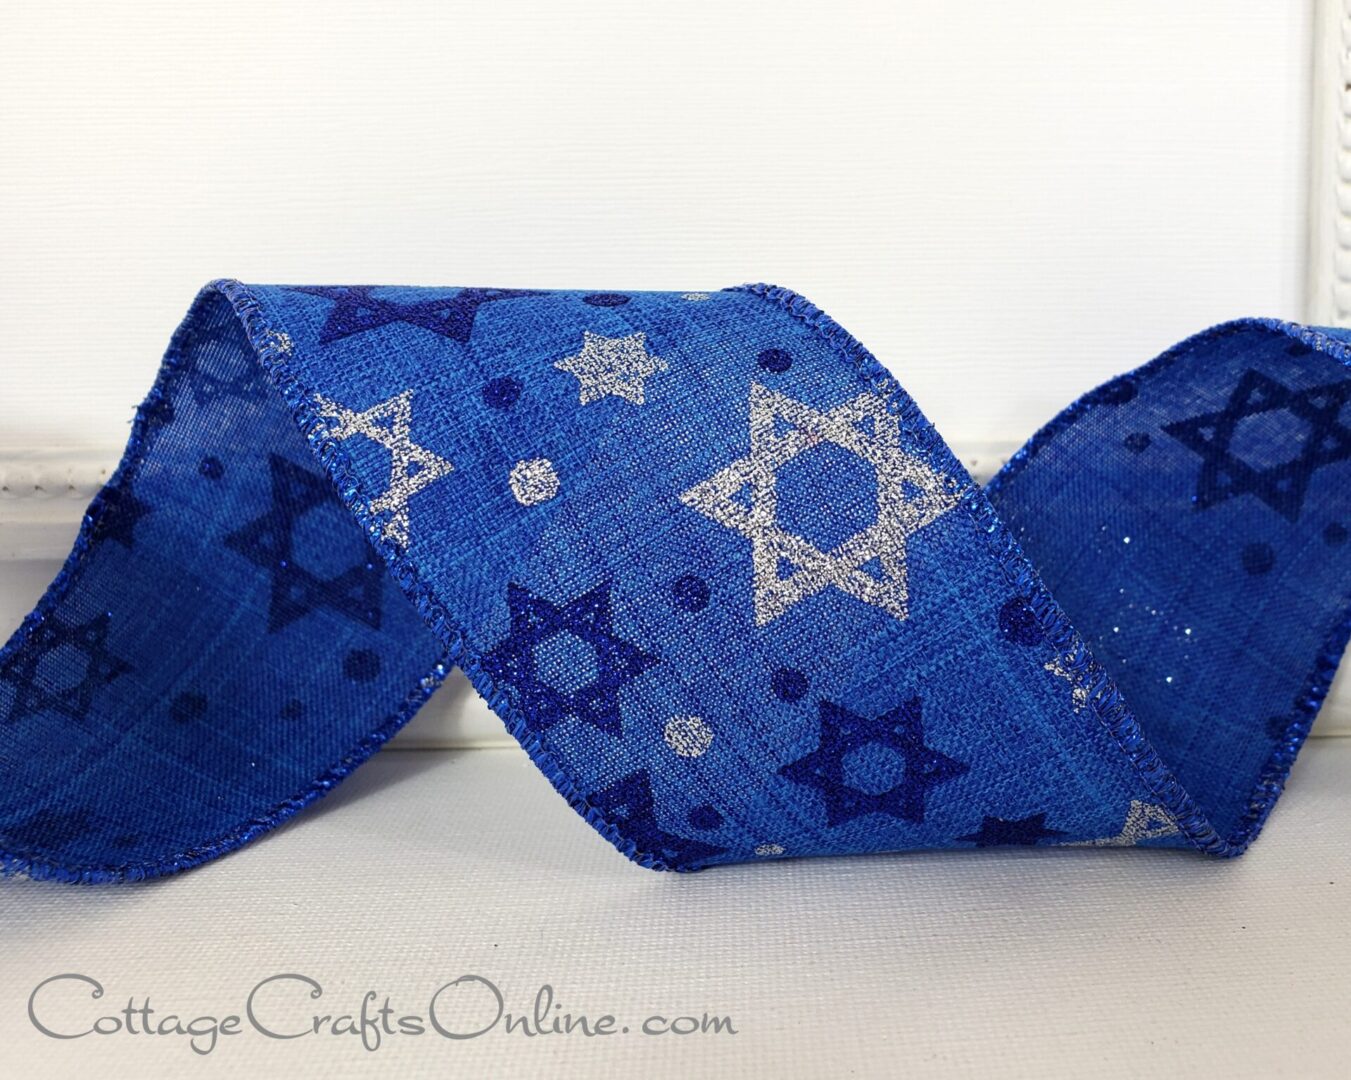 Stars of David dark blue and silver glitter on blue linen 2.5" wide wired ribbon from the Etsy shop of Cottage Crafts Online.